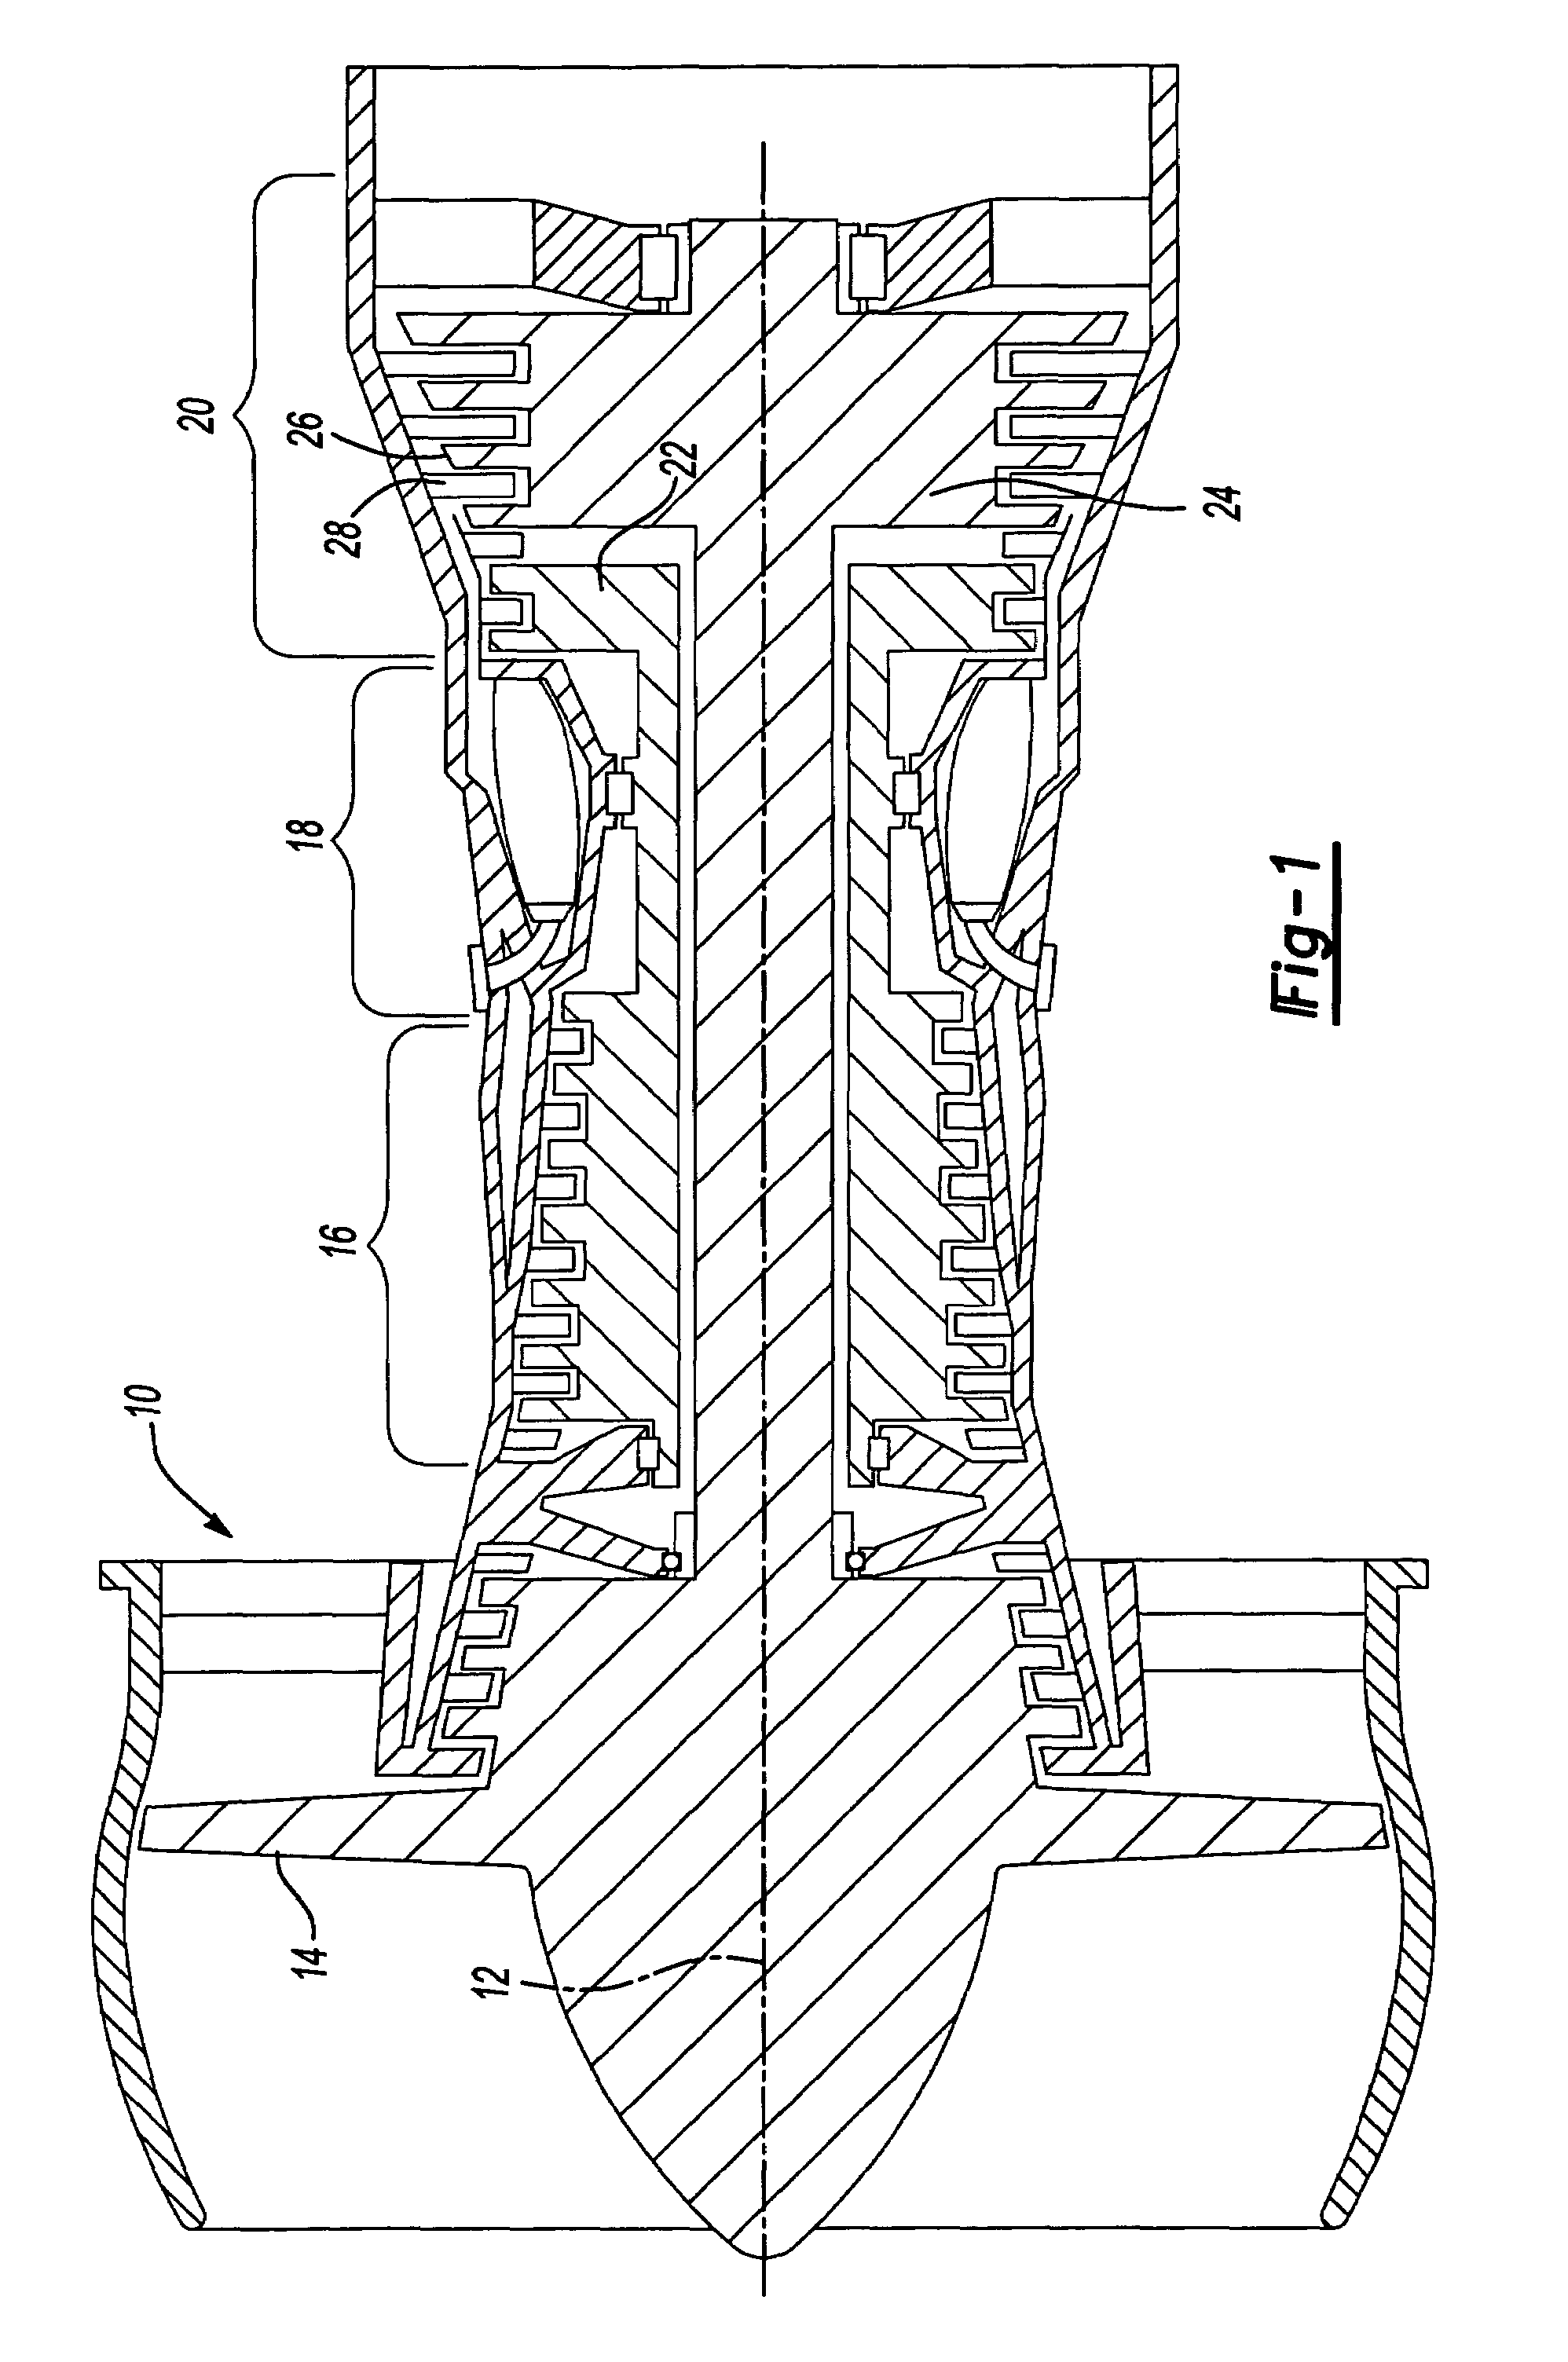 Turbine blade including revised trailing edge cooling